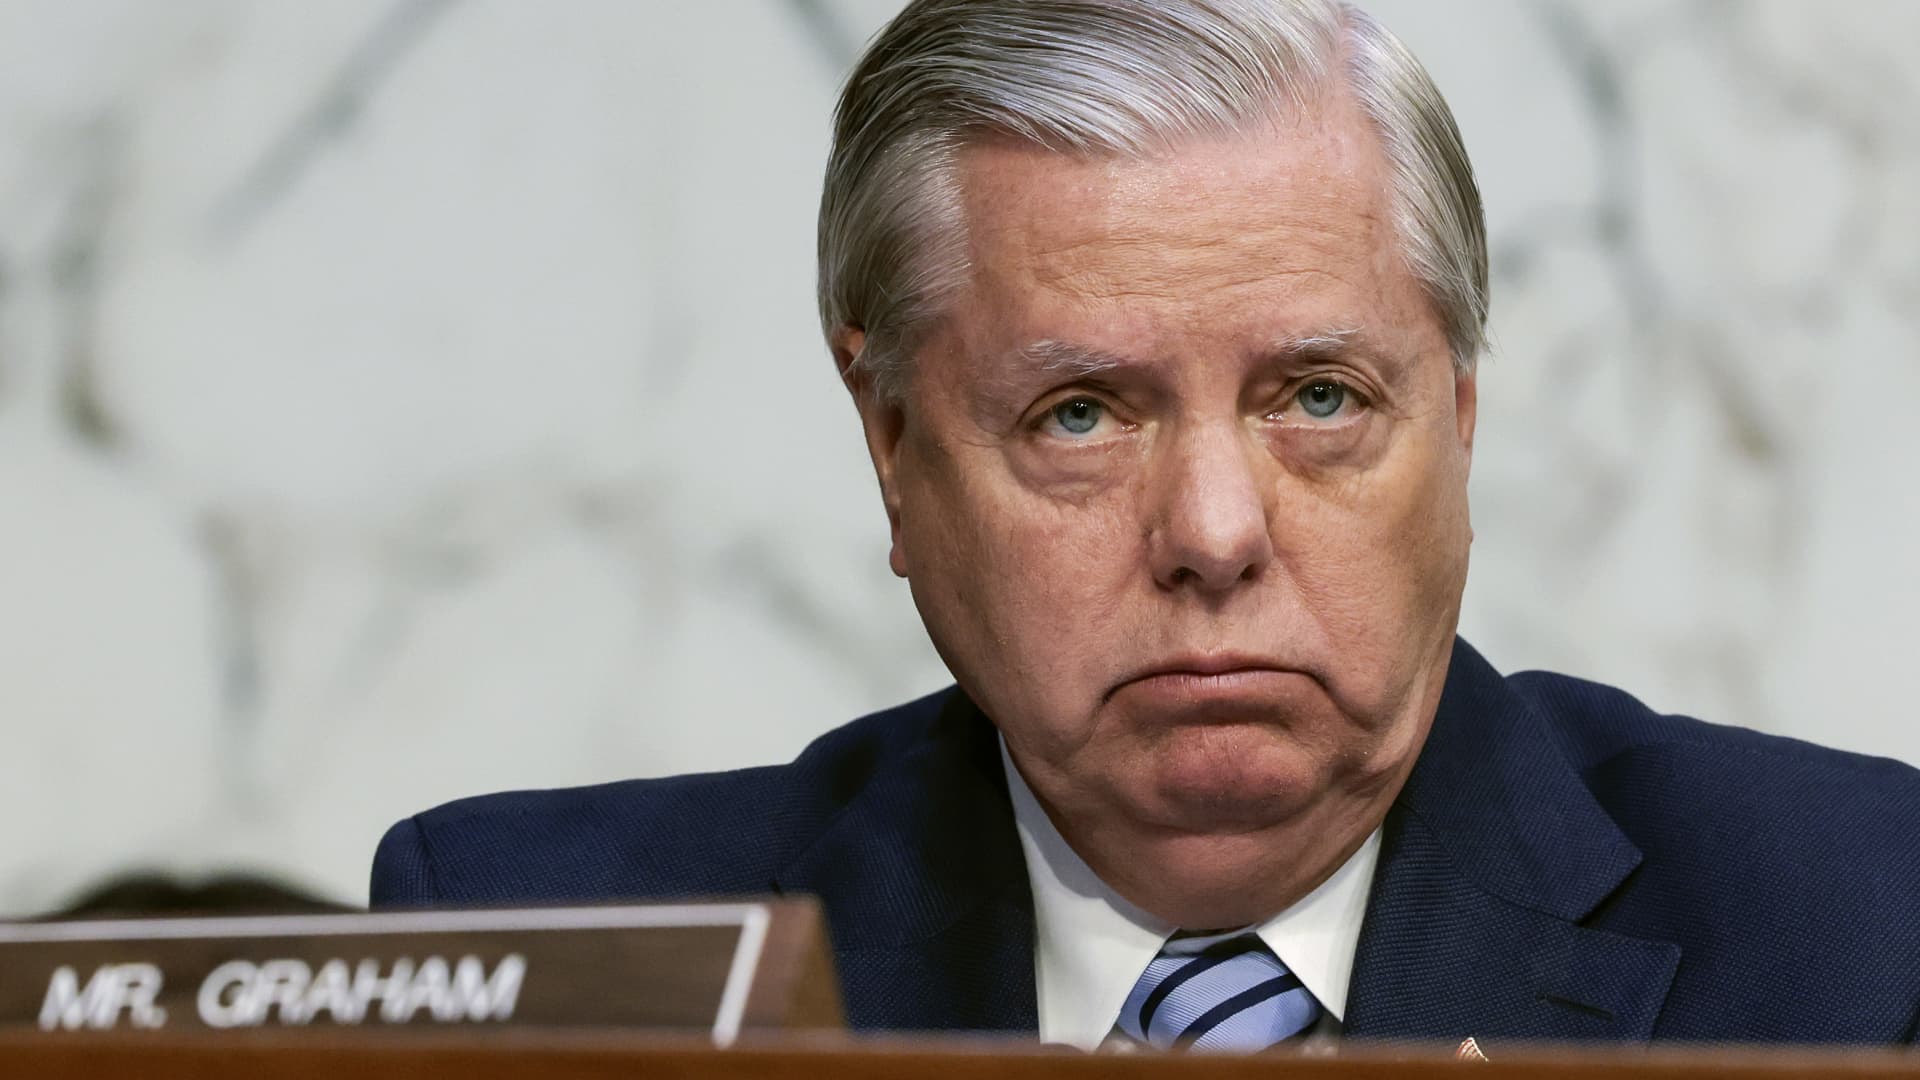 Sen. Lindsey Graham questions U.S. Supreme Court nominee Judge Ketanji Brown Jackson during her Senate Judiciary Committee confirmation hearing in the Hart Senate Office Building on Capitol Hill March 22, 2022 in Washington, DC.